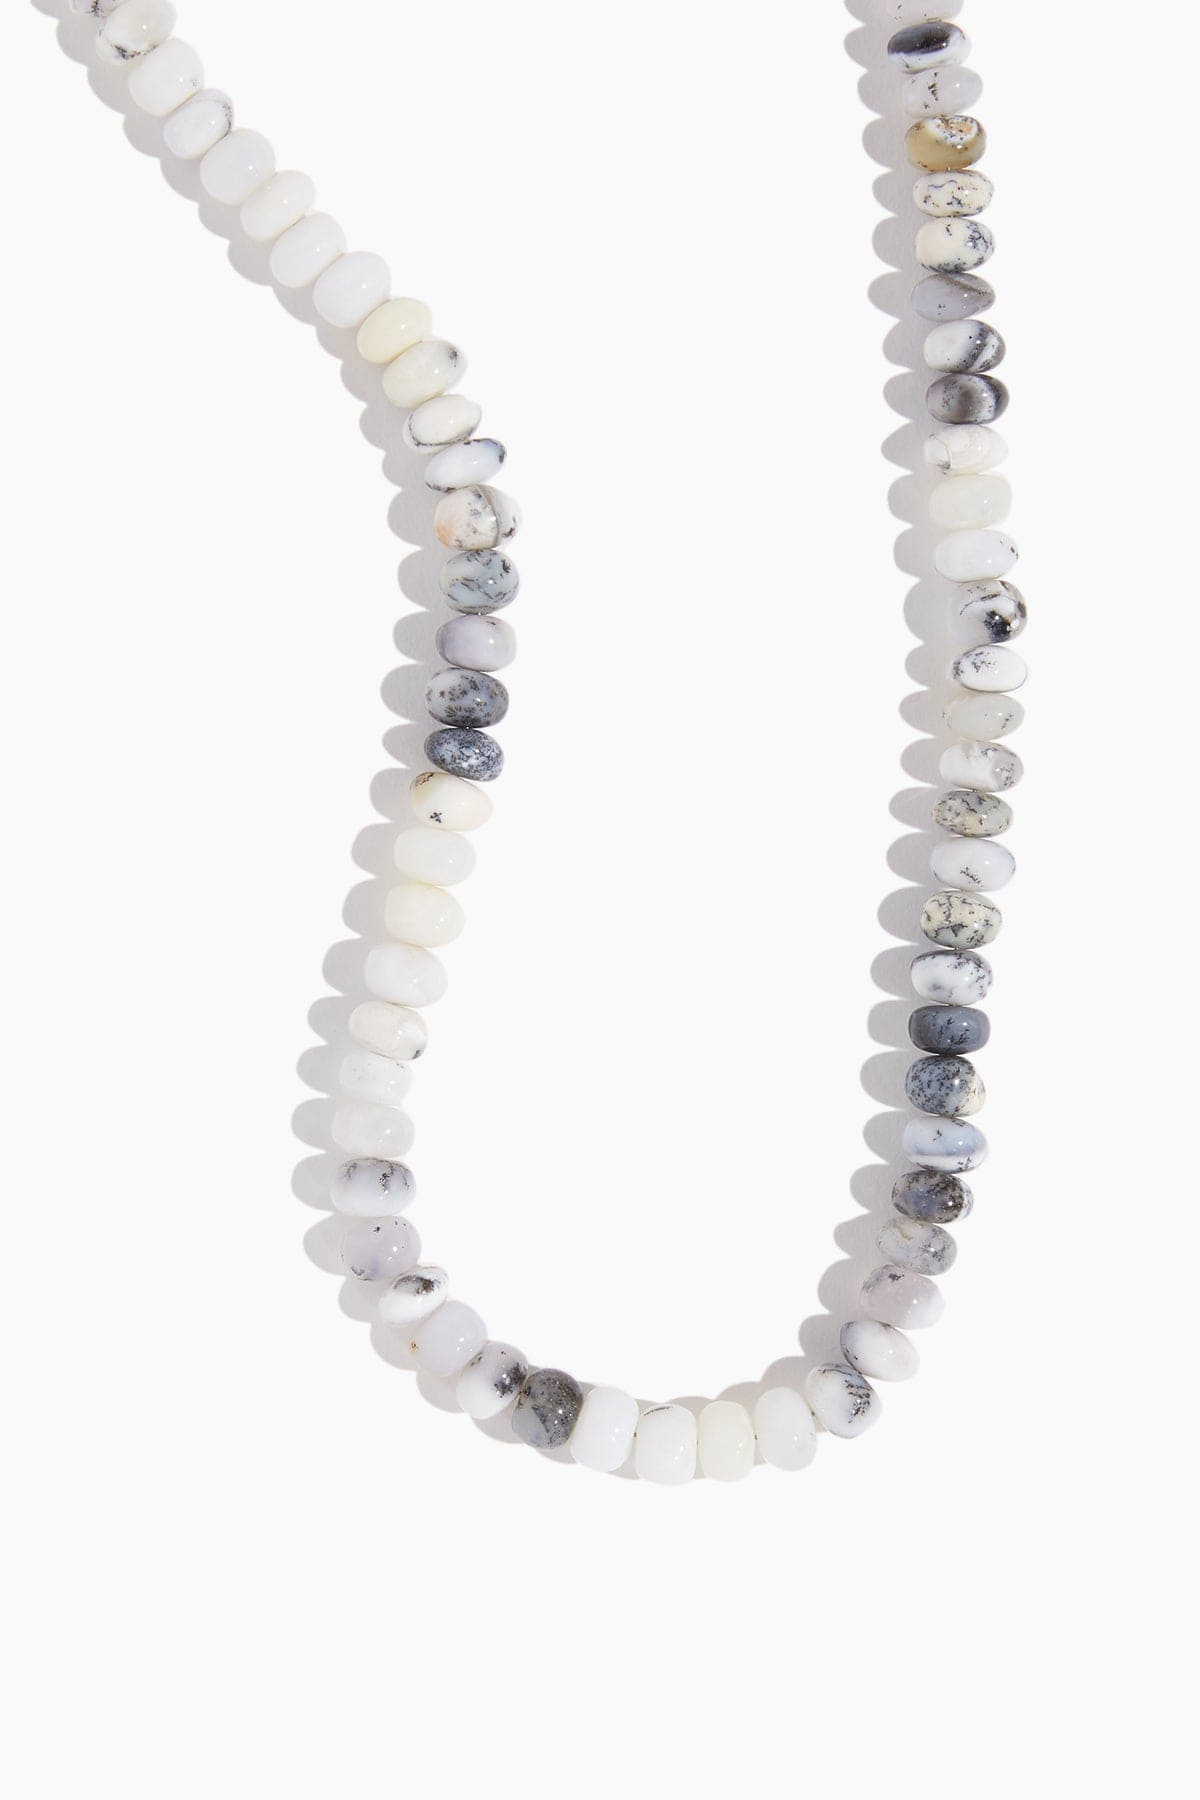 Theodosia Candy Necklace in Cookies and Cream Opal - Size: One size